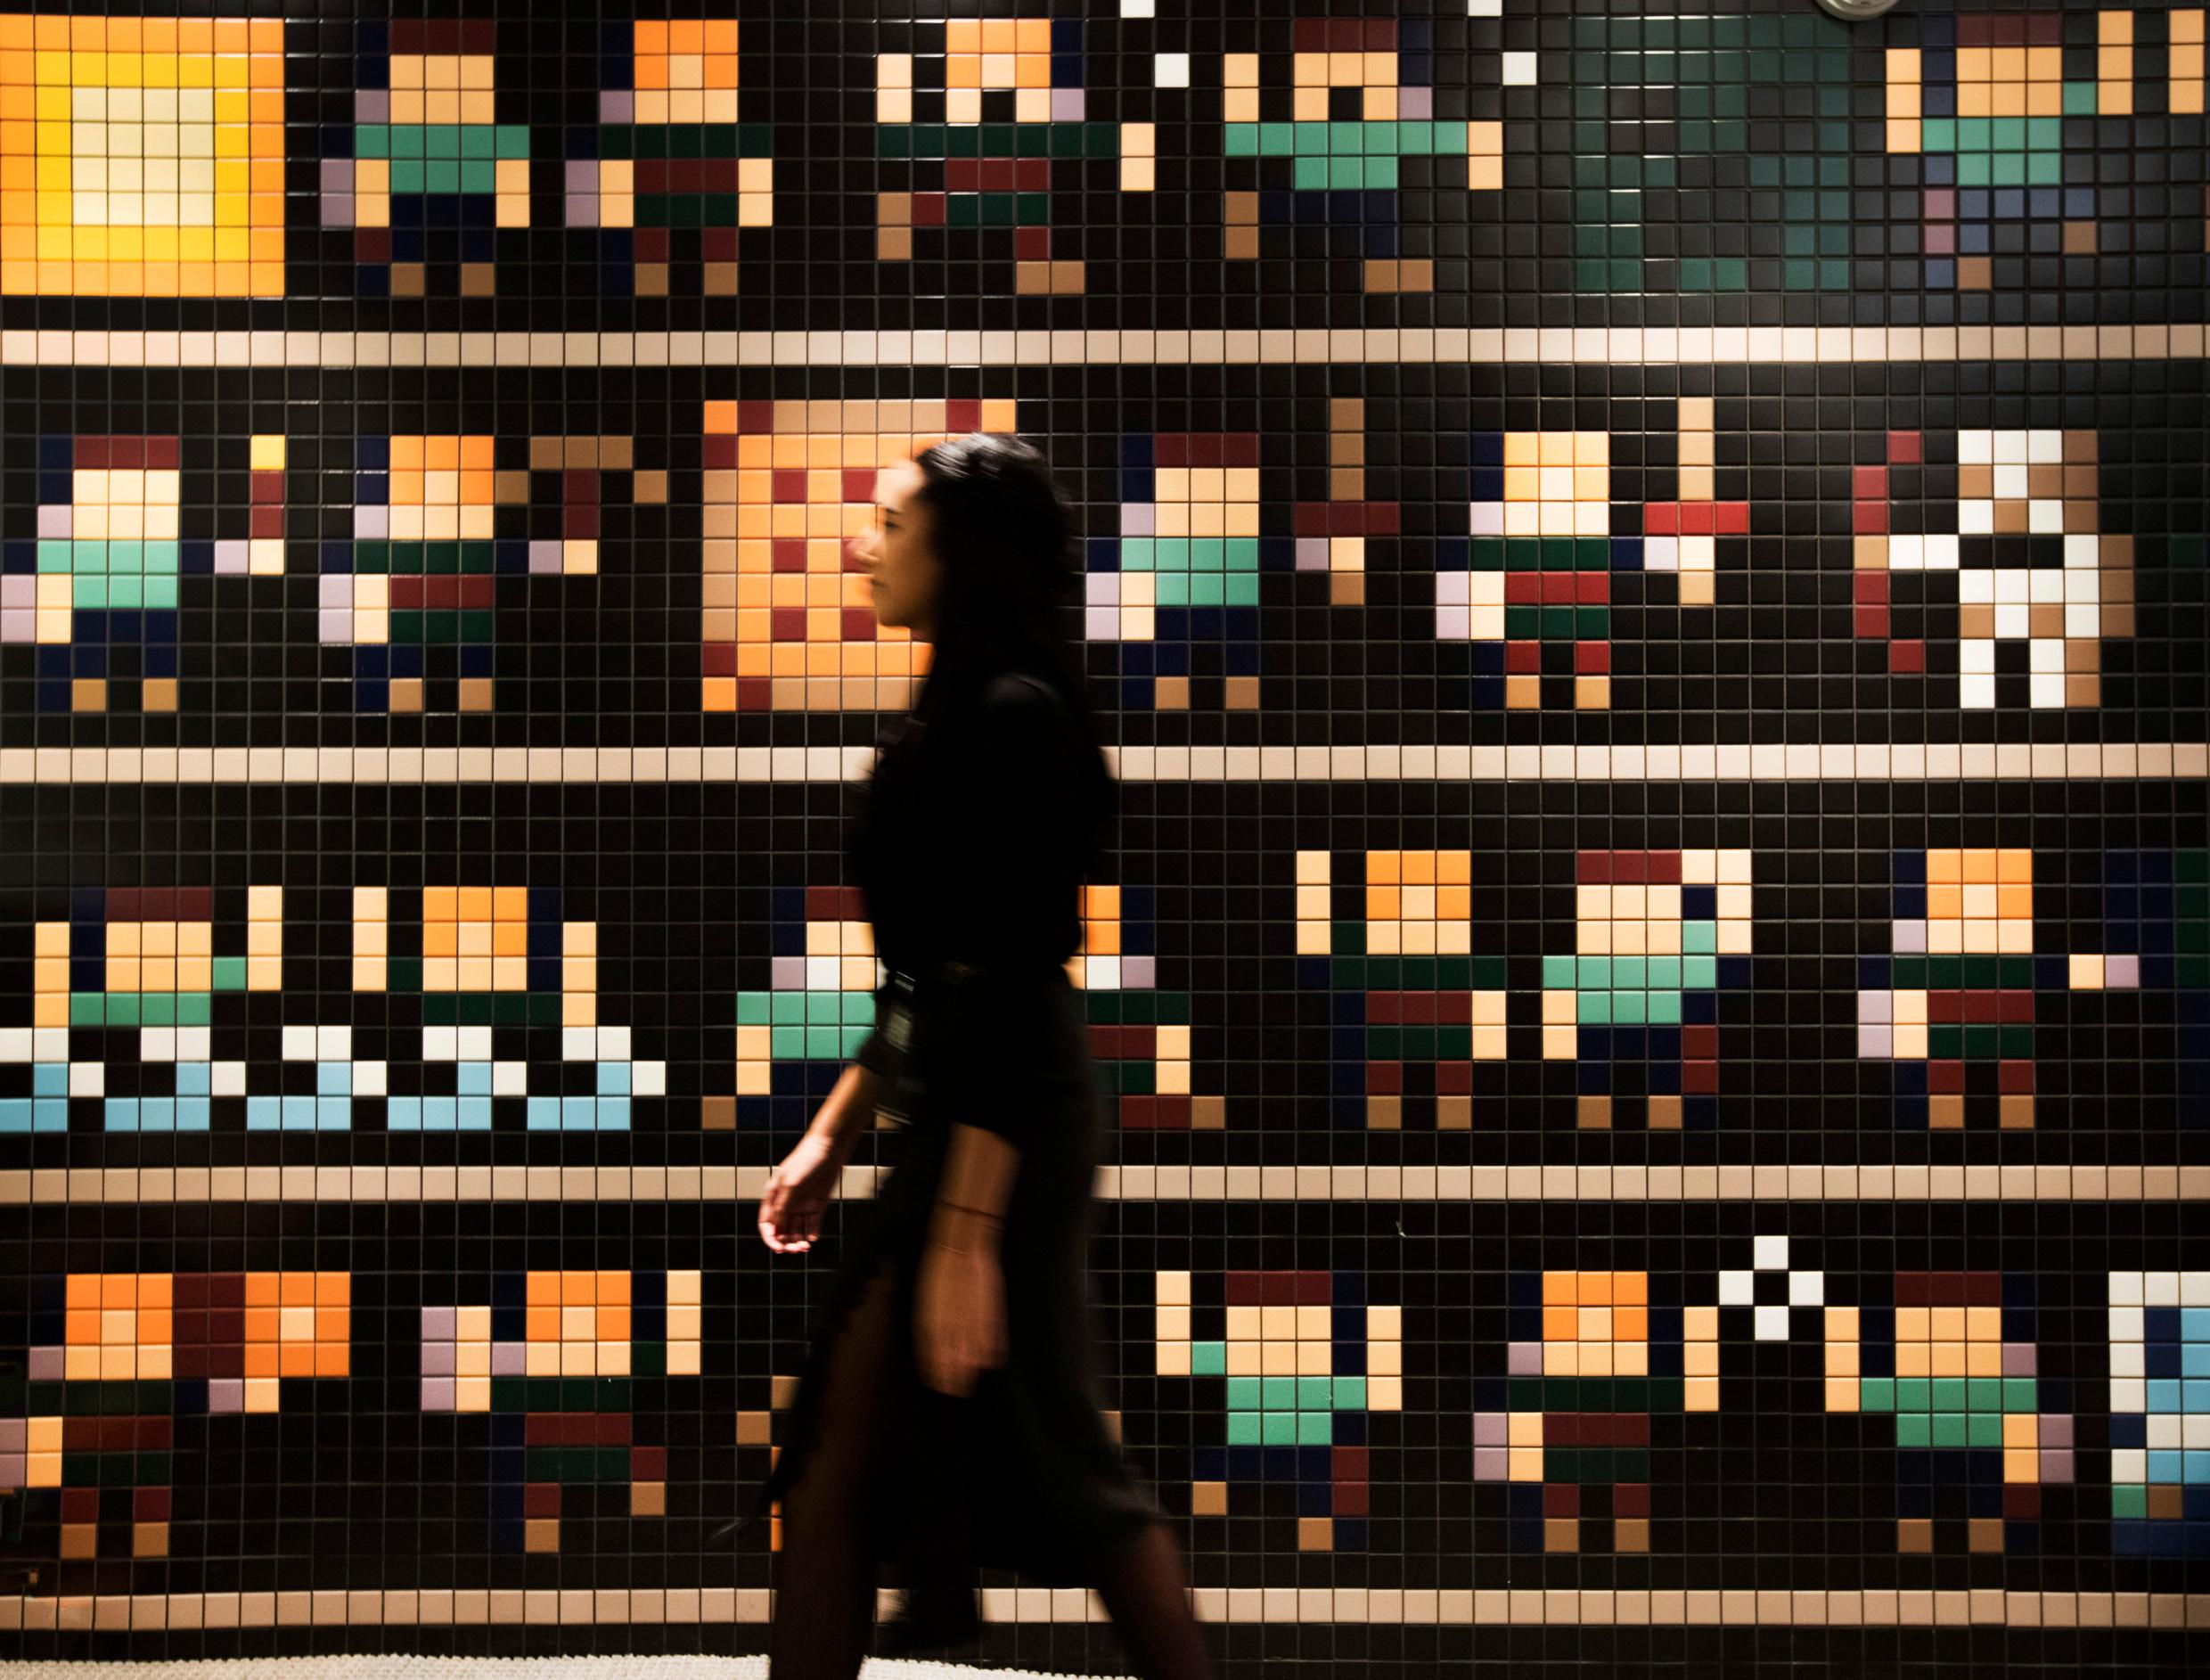 A woman walking past a wall of mosaic with figures resembling Minecraft characters.